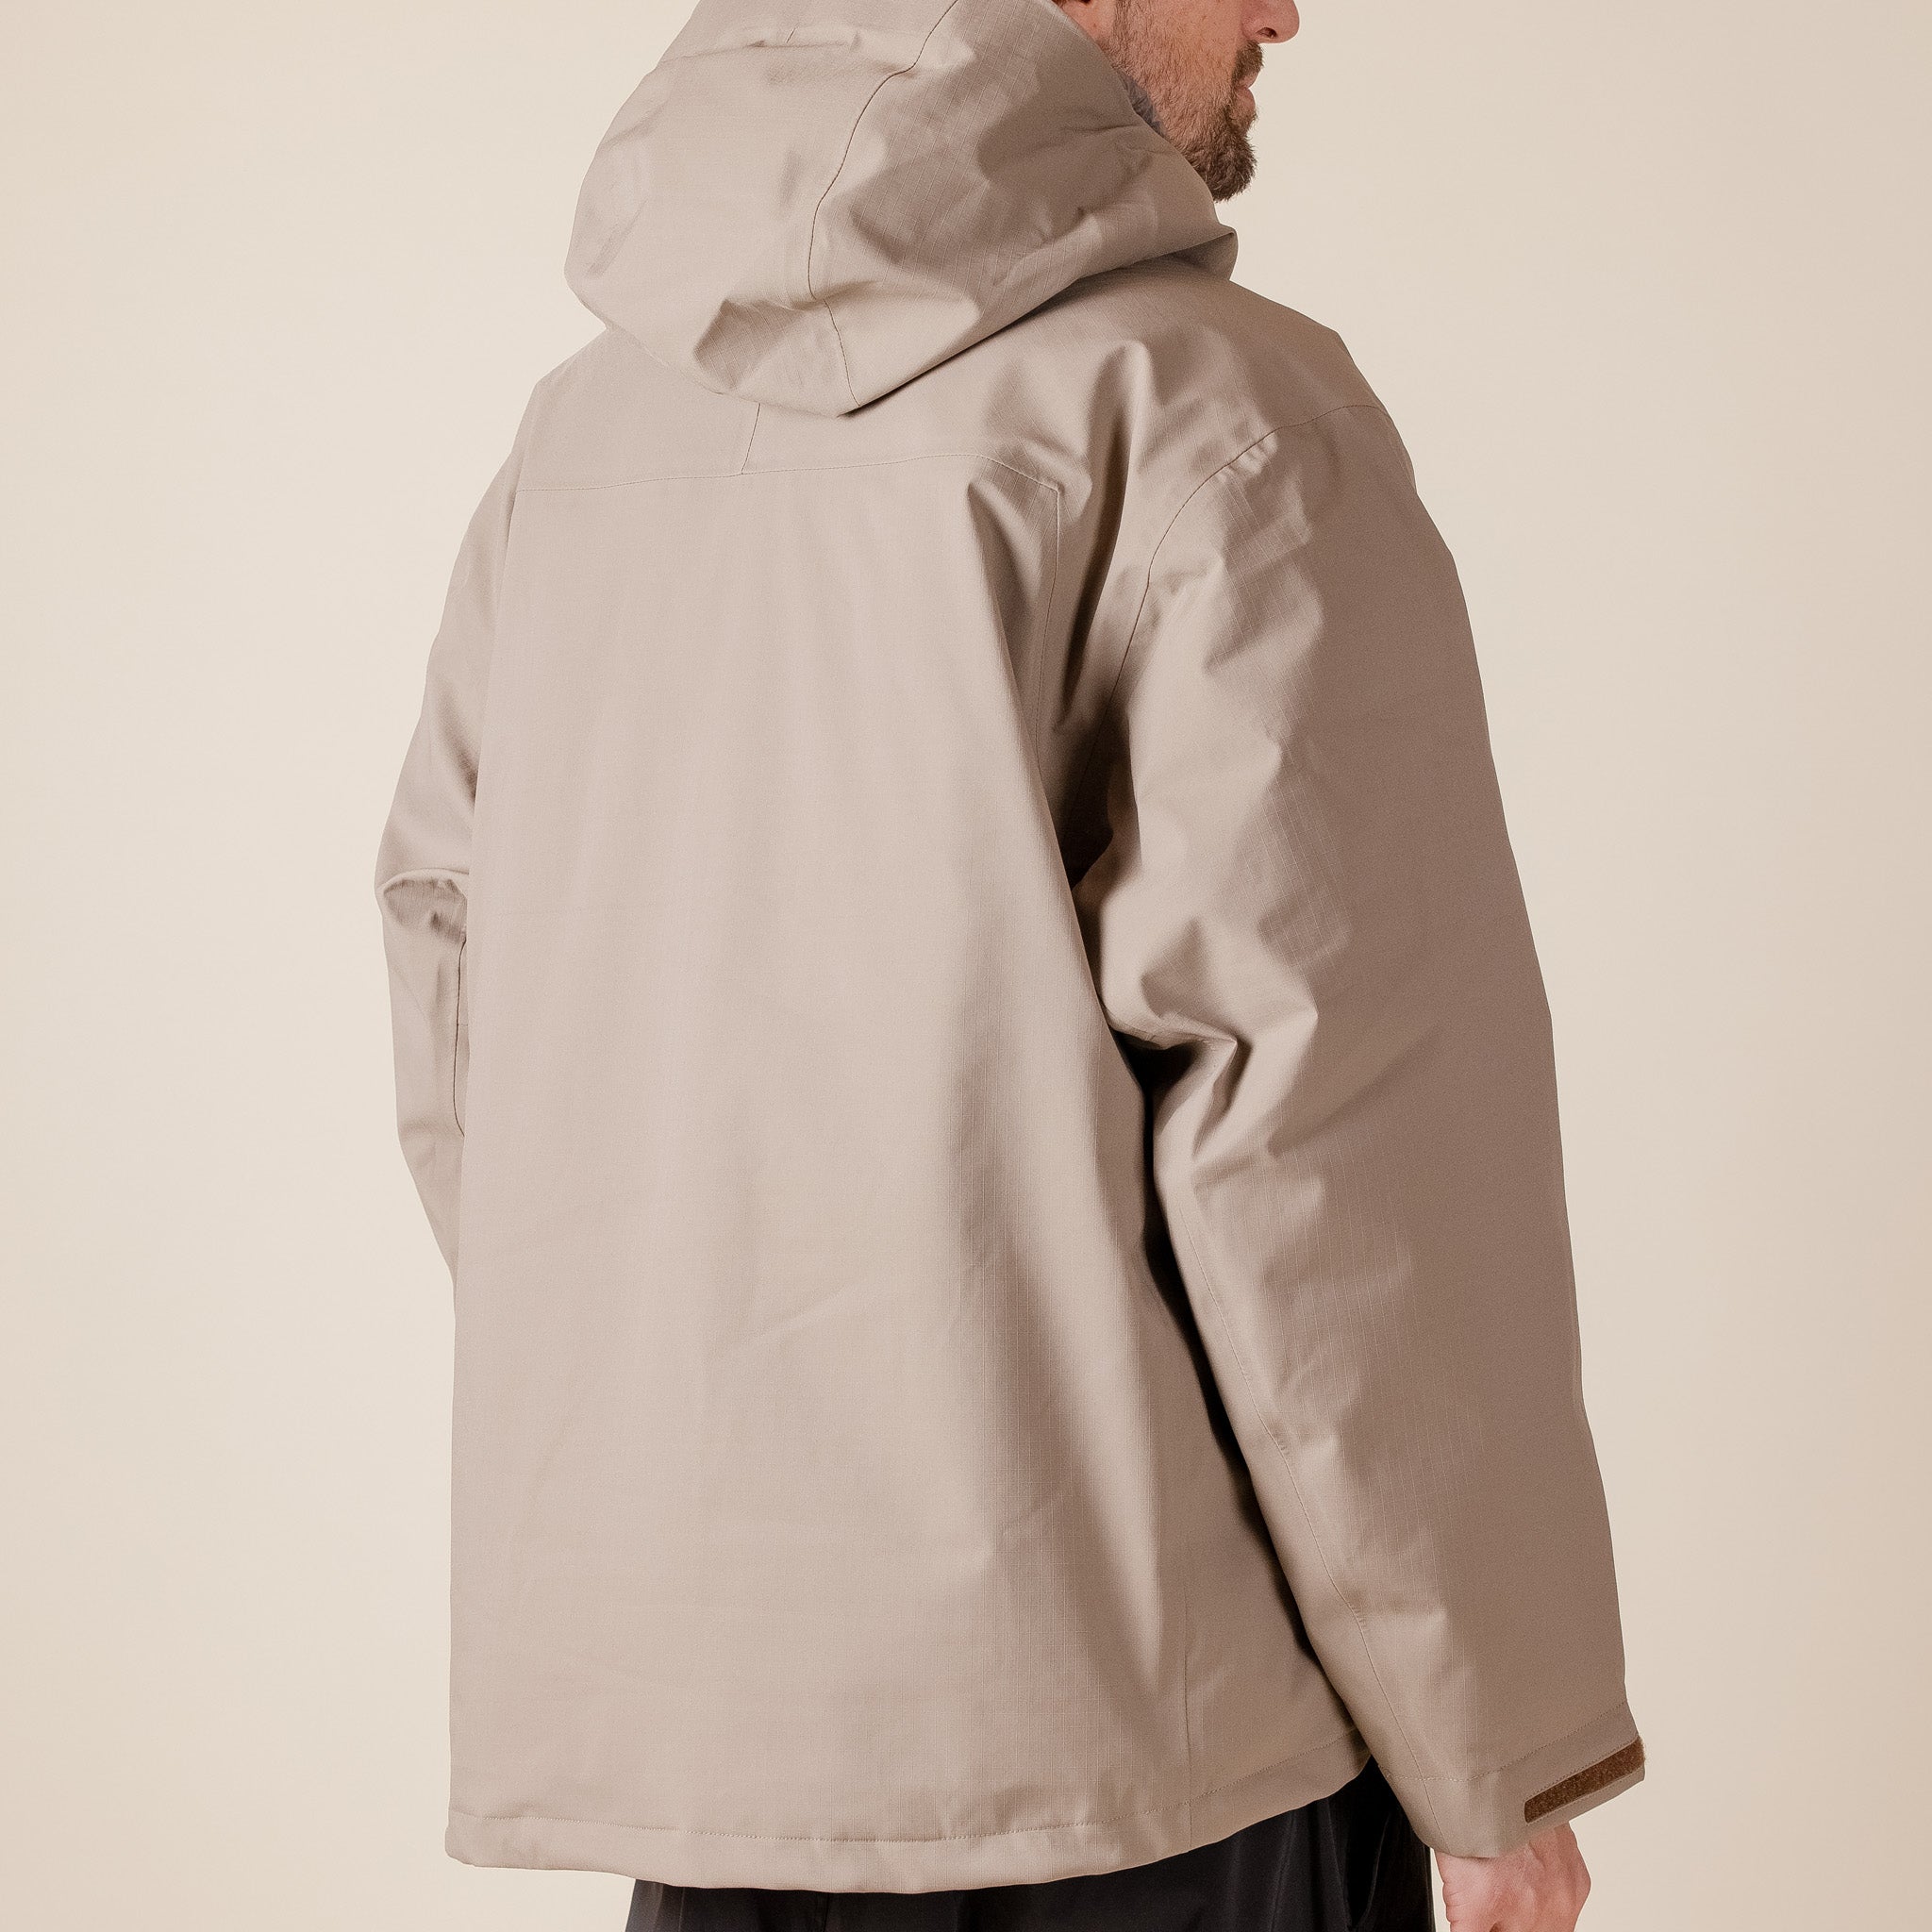 CMF Comfy Outdoor Garment - AR Guide Down L7 Coexist Jacket - Greige